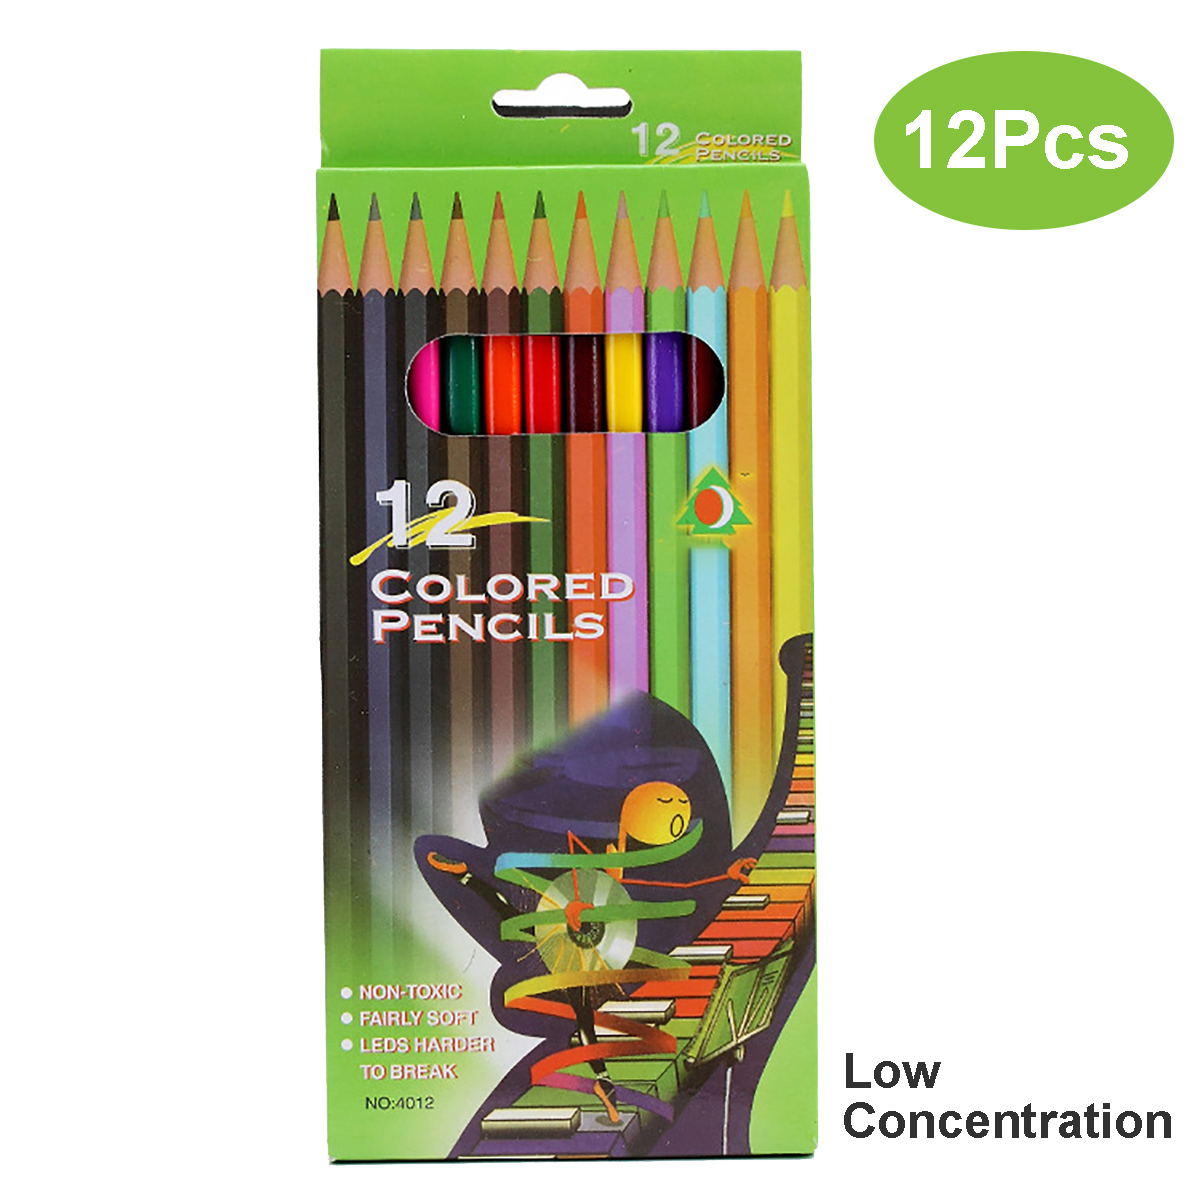 12-Colors-Wood-Color-Pencils-Set-Non-toxic-Artist-Painting-Oil-Pencil-for-School-Office-Drawing-Sket-1742753-2